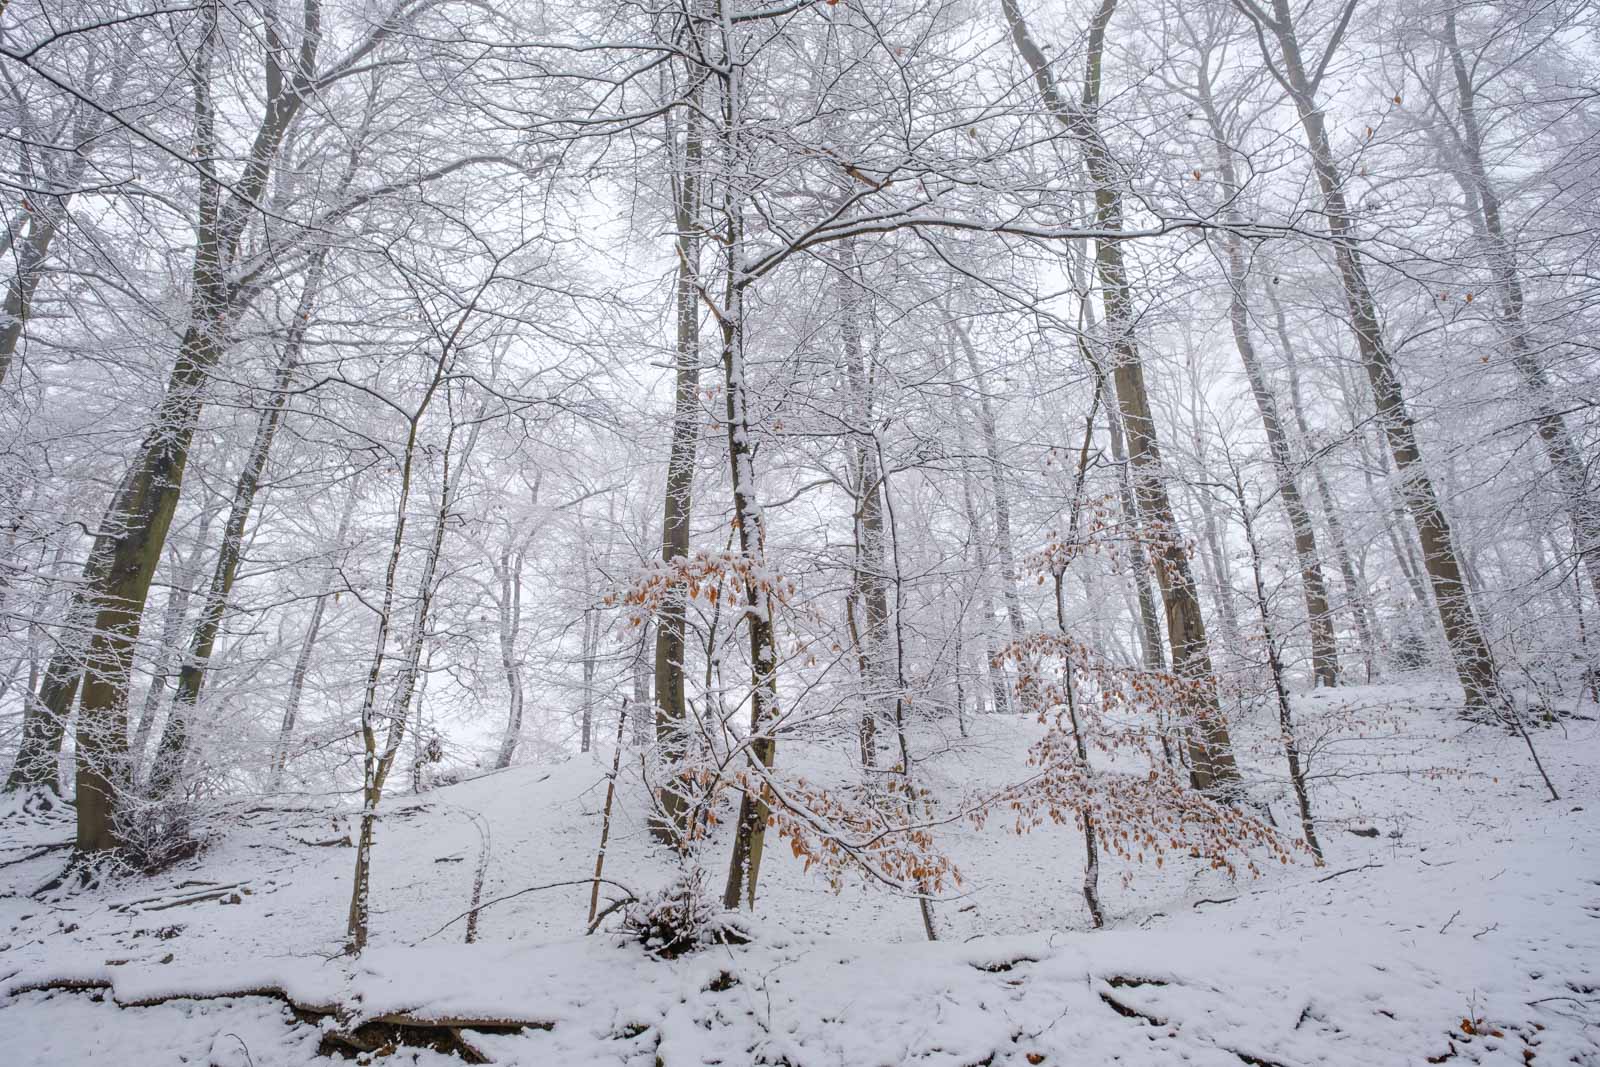 Winter in the Teutoburg Forest in January 2021 (Bielefeld, Germany).